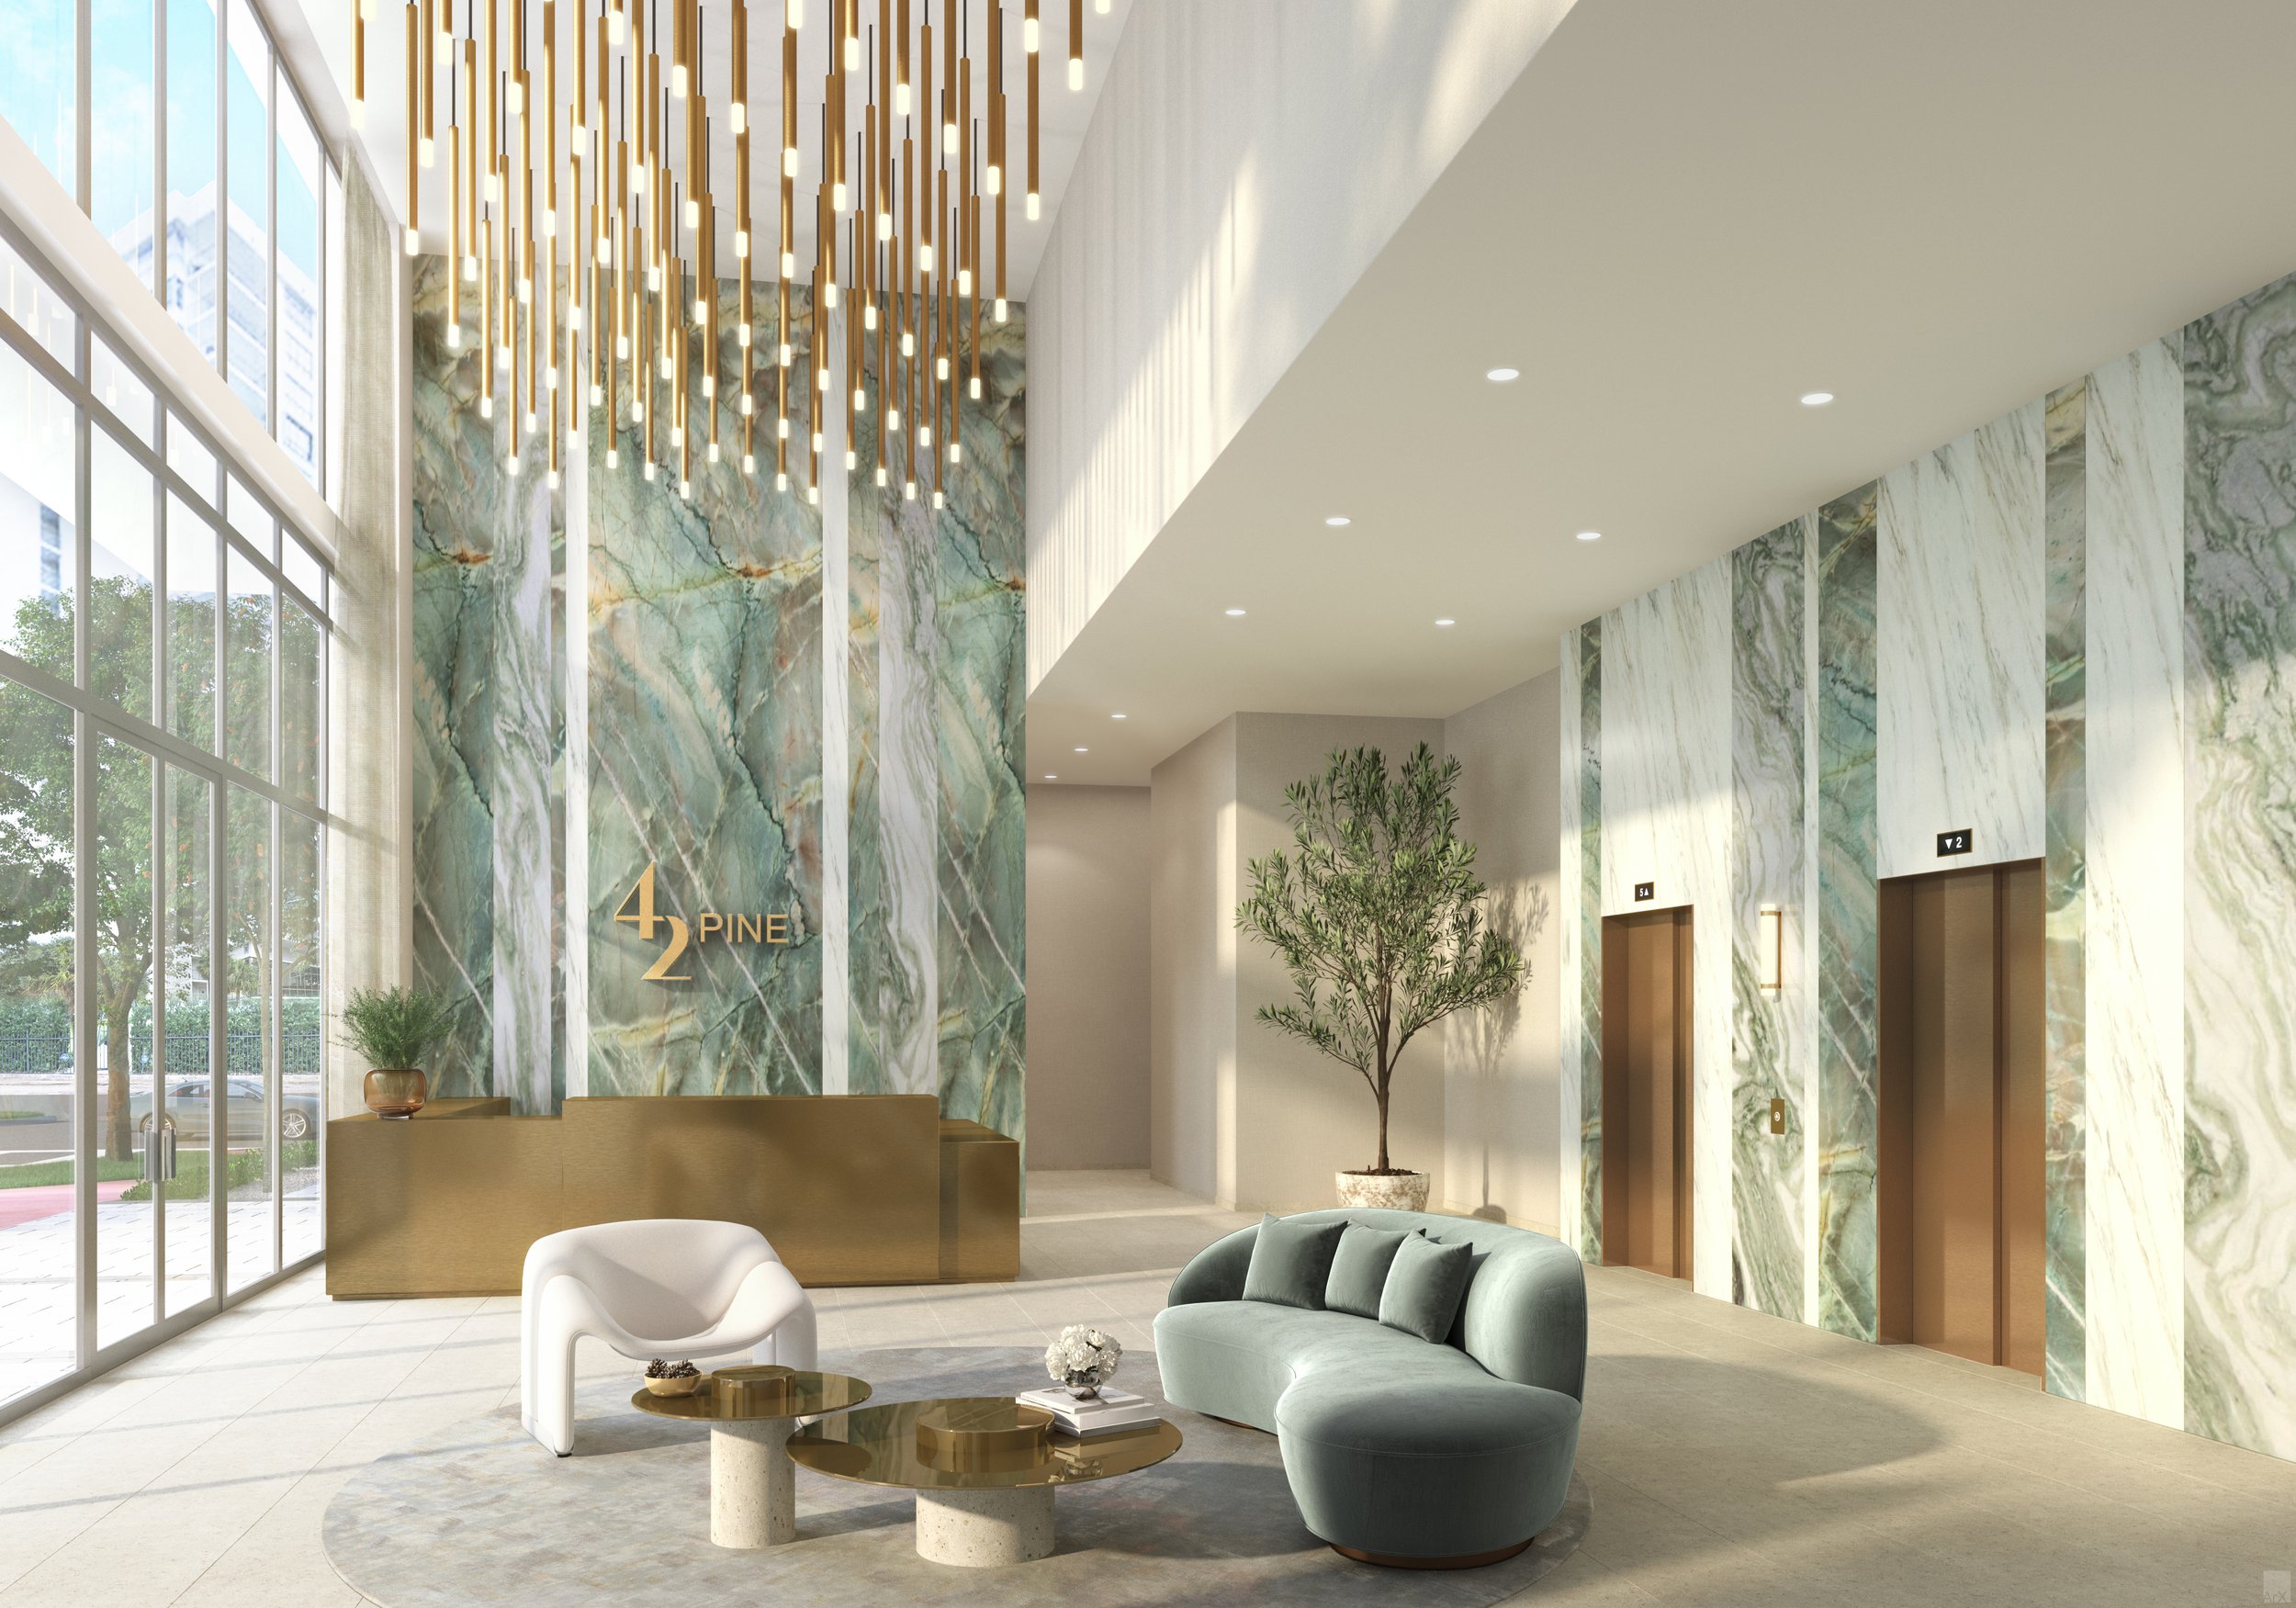 Arquitectonica-Designed Boutique Condo 42 Pine Launches Sales On Miami Beach's Pine Tree Drive And 41st Street8.jpg